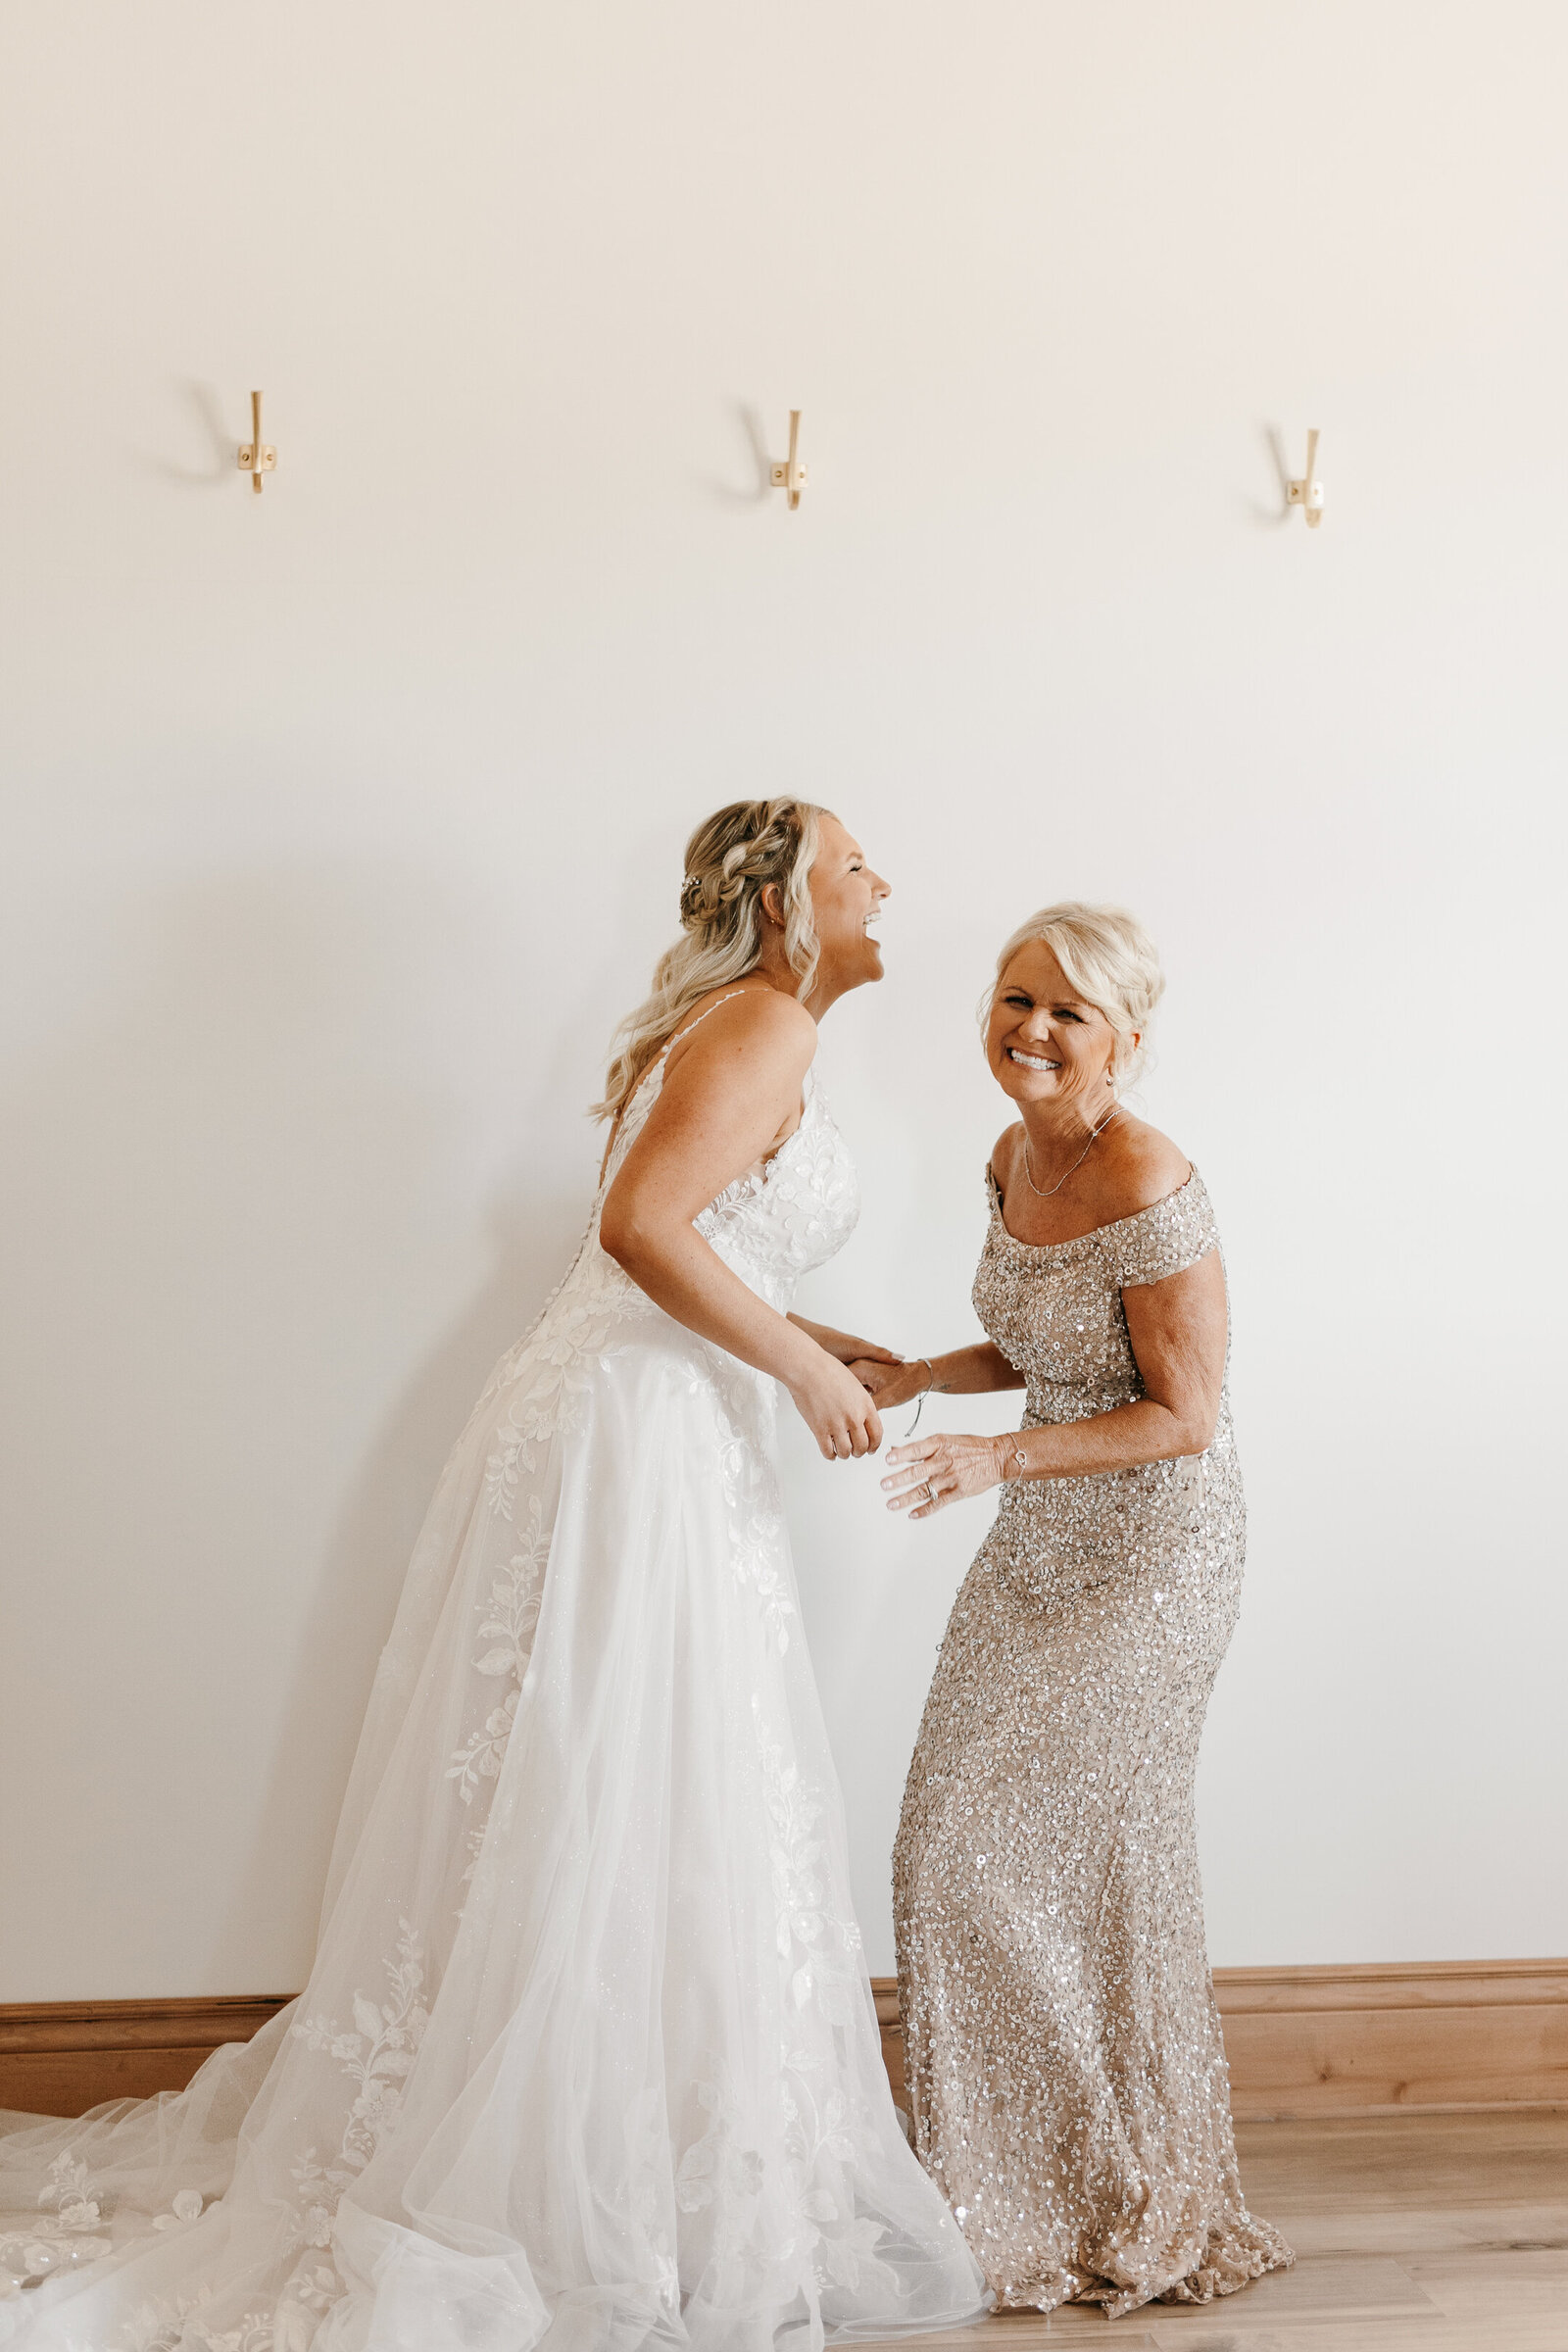 Mom and daughter getting ready on wedding day at Prairie Hill Vineyard - Alex Bo Photo